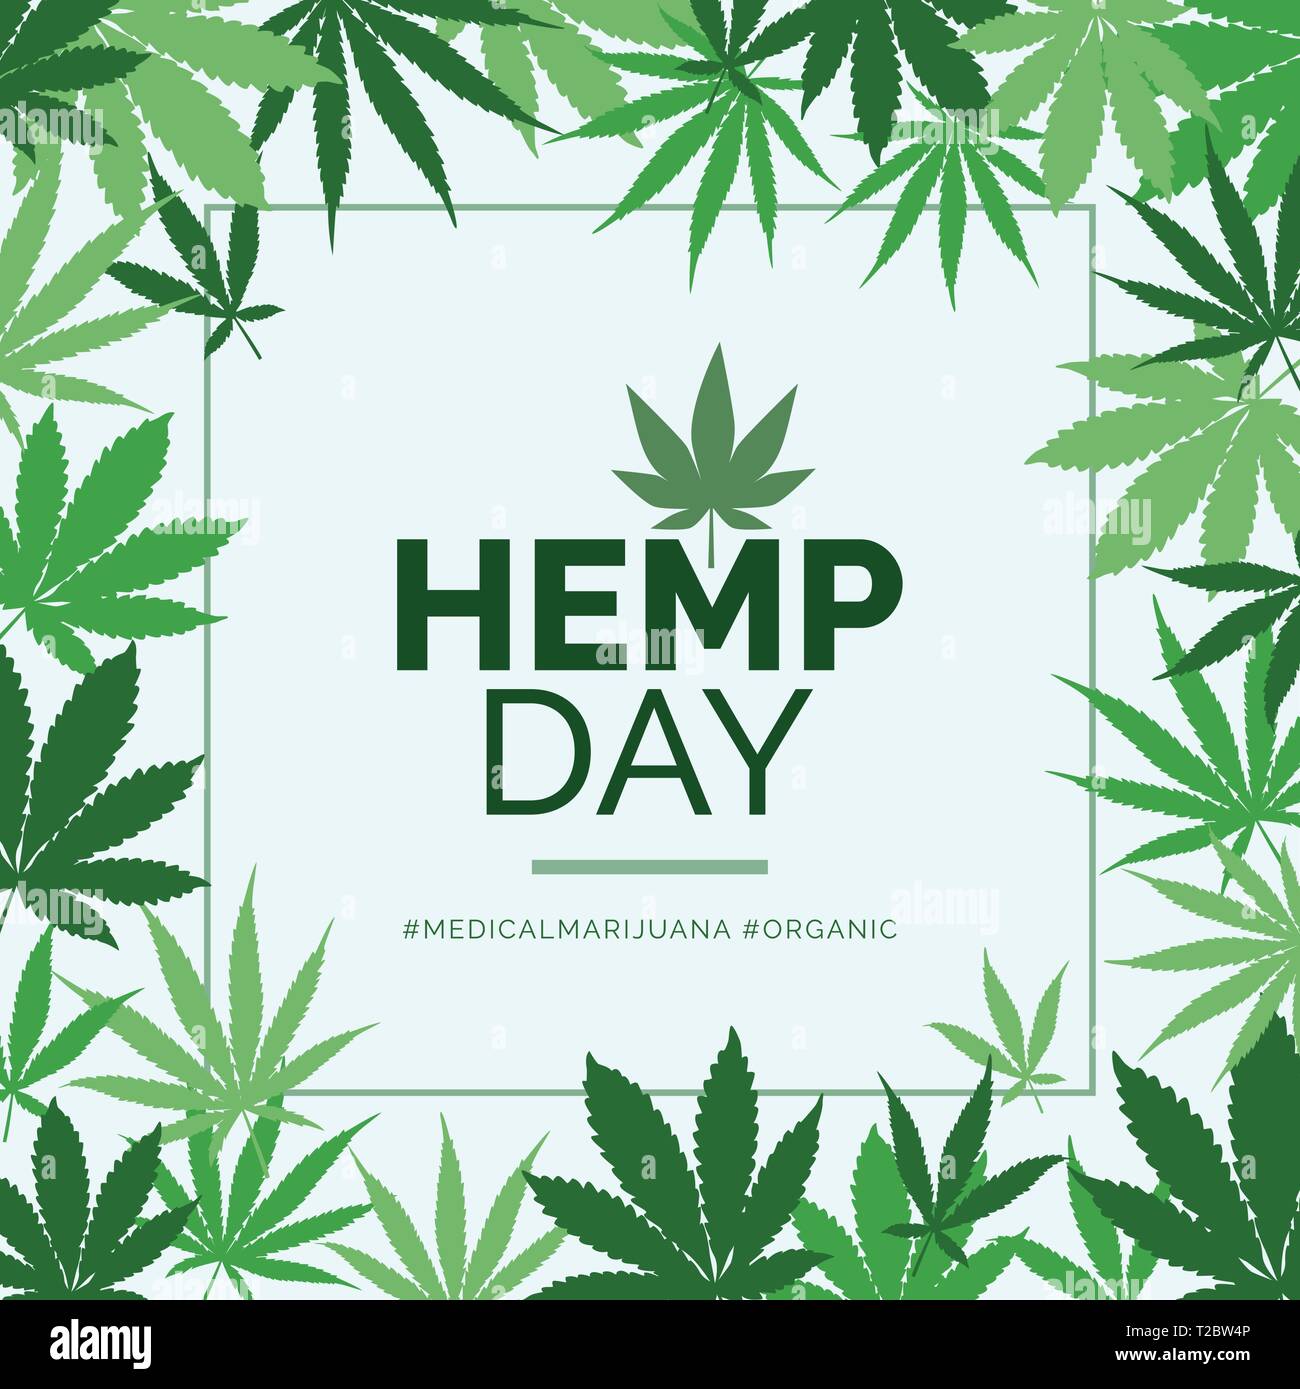 Hemp day and medical marijuana advertisement with green leaves frame Stock Vector